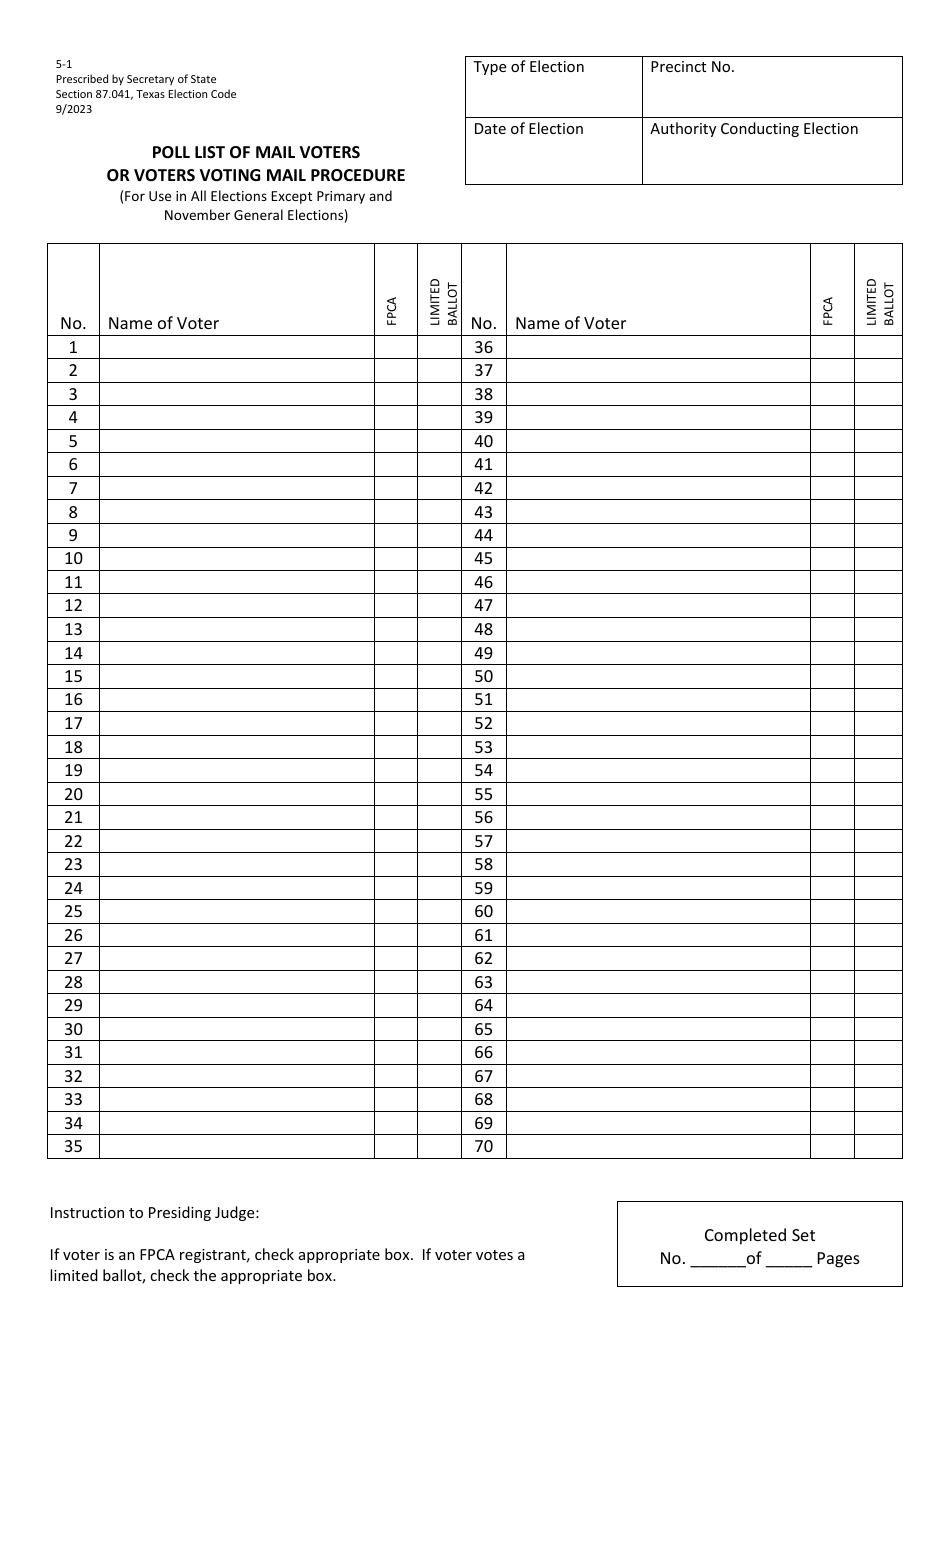 Form 5-1 Poll List of Mail Voters or Voters Voting Mail Procedure (For Use in All Elections Except Primary and November General Elections) - Texas, Page 1